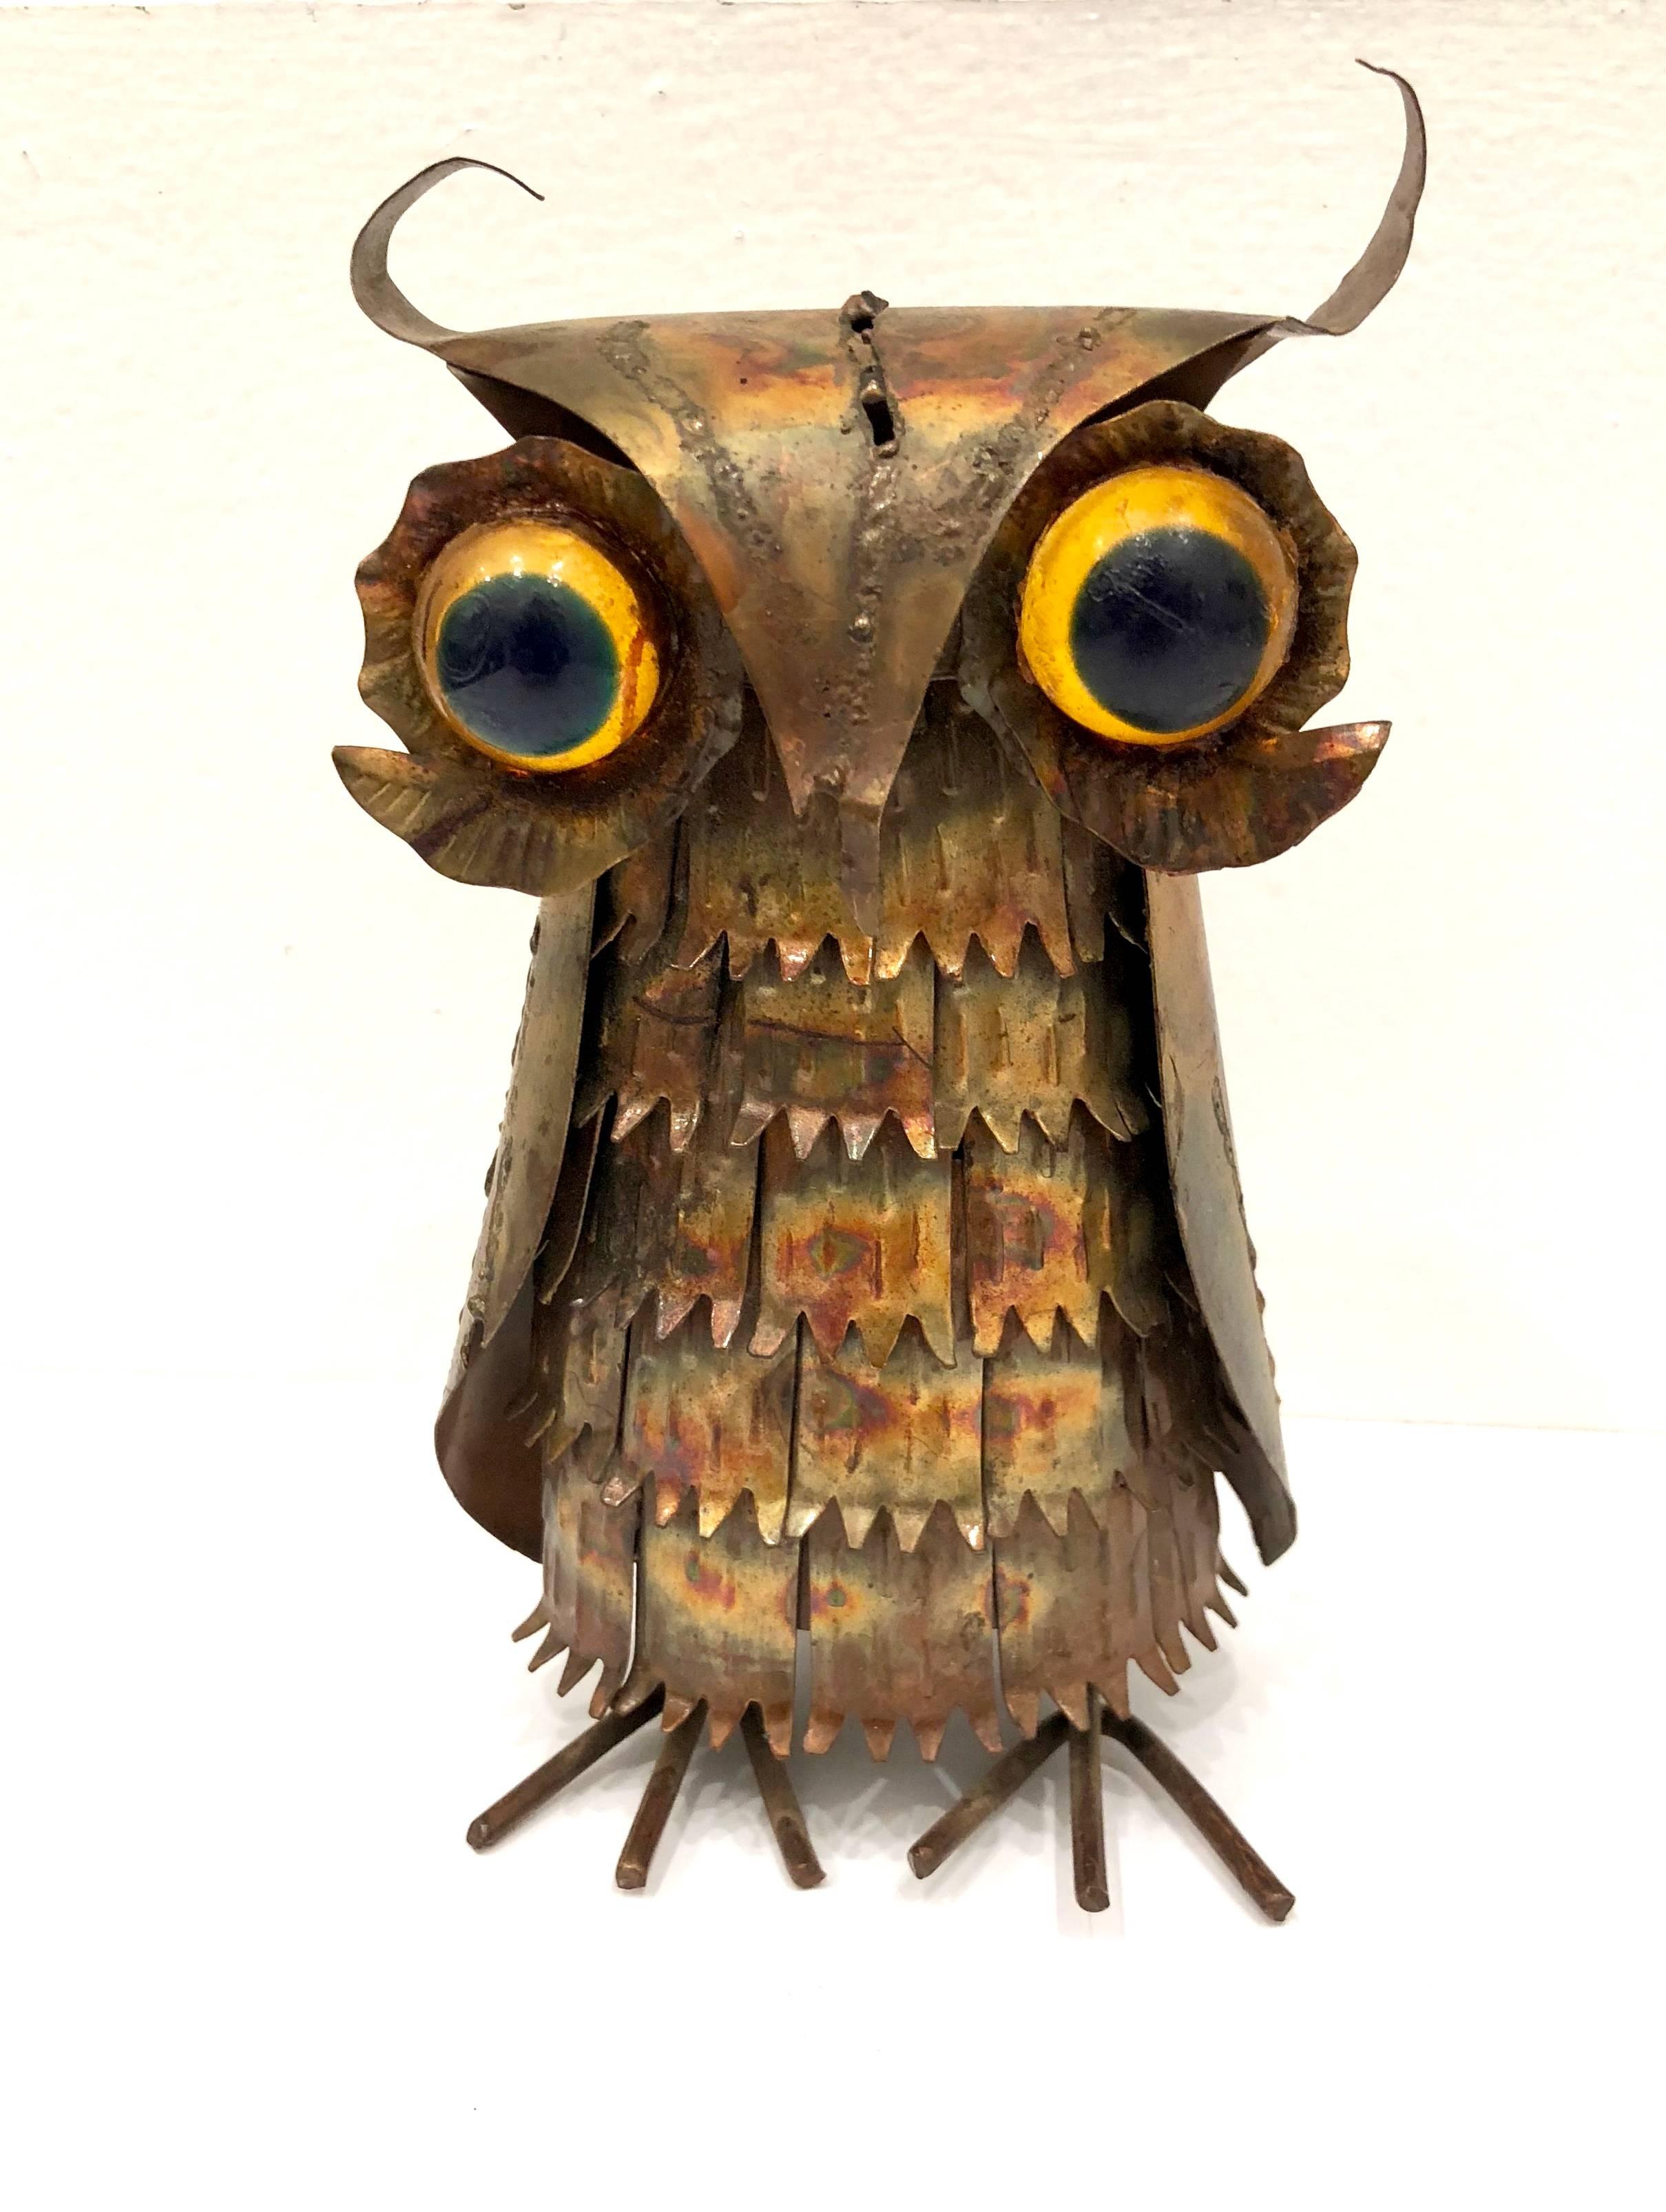 Whimsical metal owl sculpture, hand-sculpted, circa 1970s. With resin eyes.